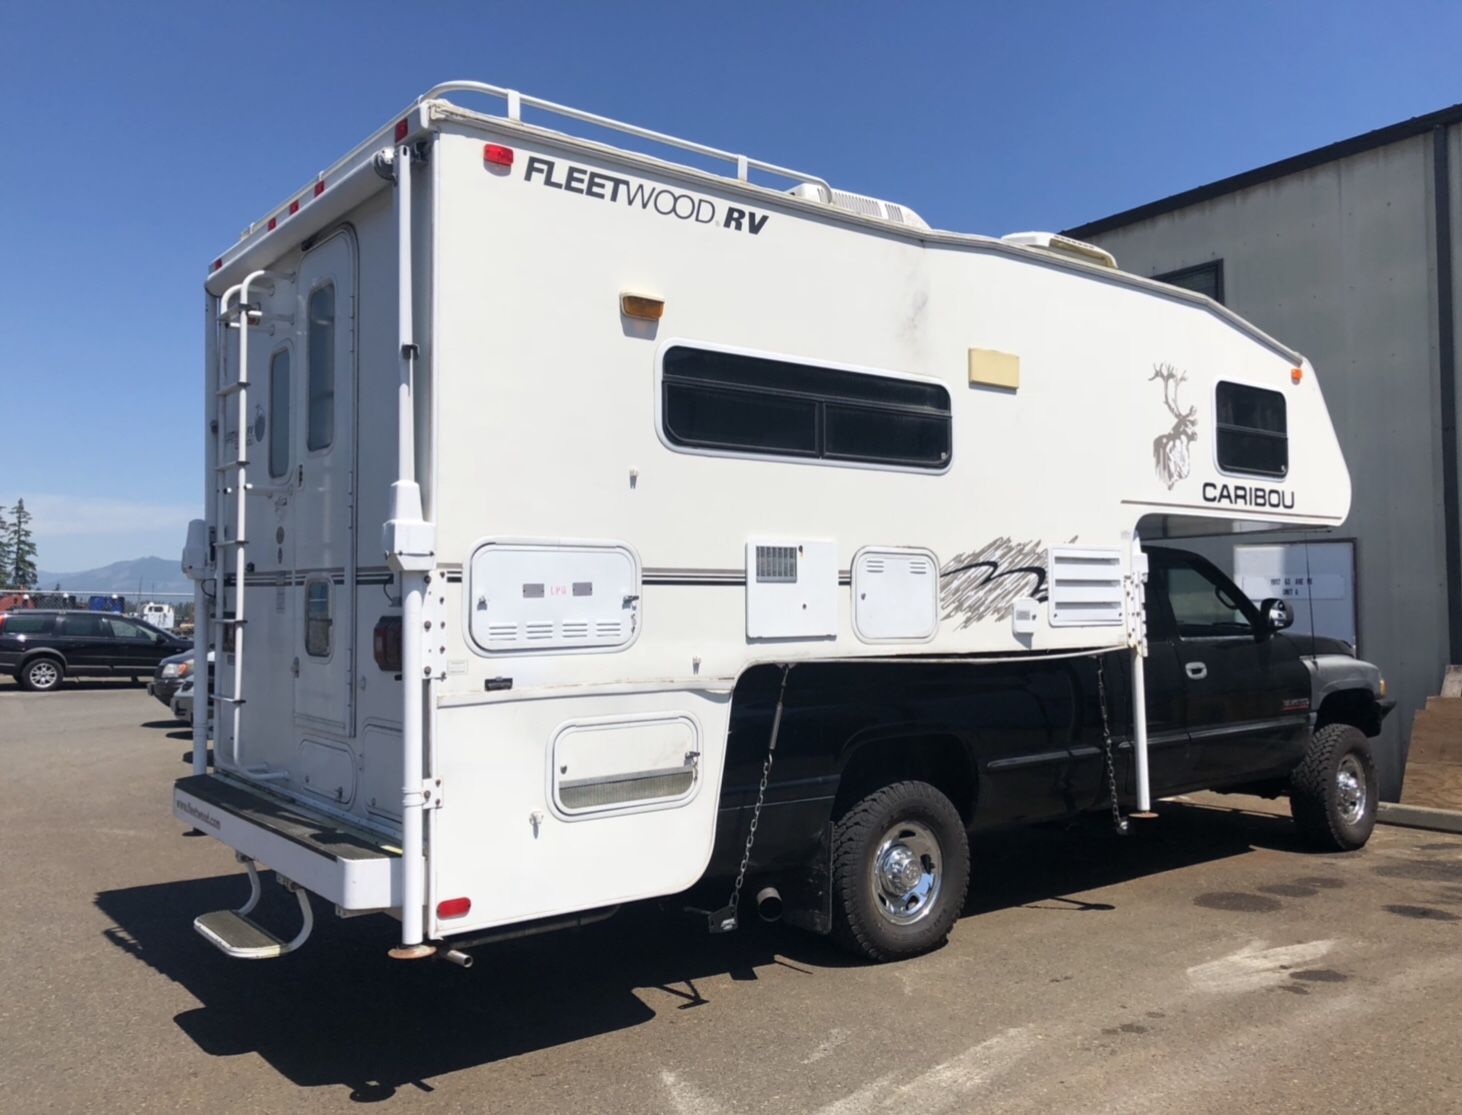 Fleetwood caribou with slideout camper